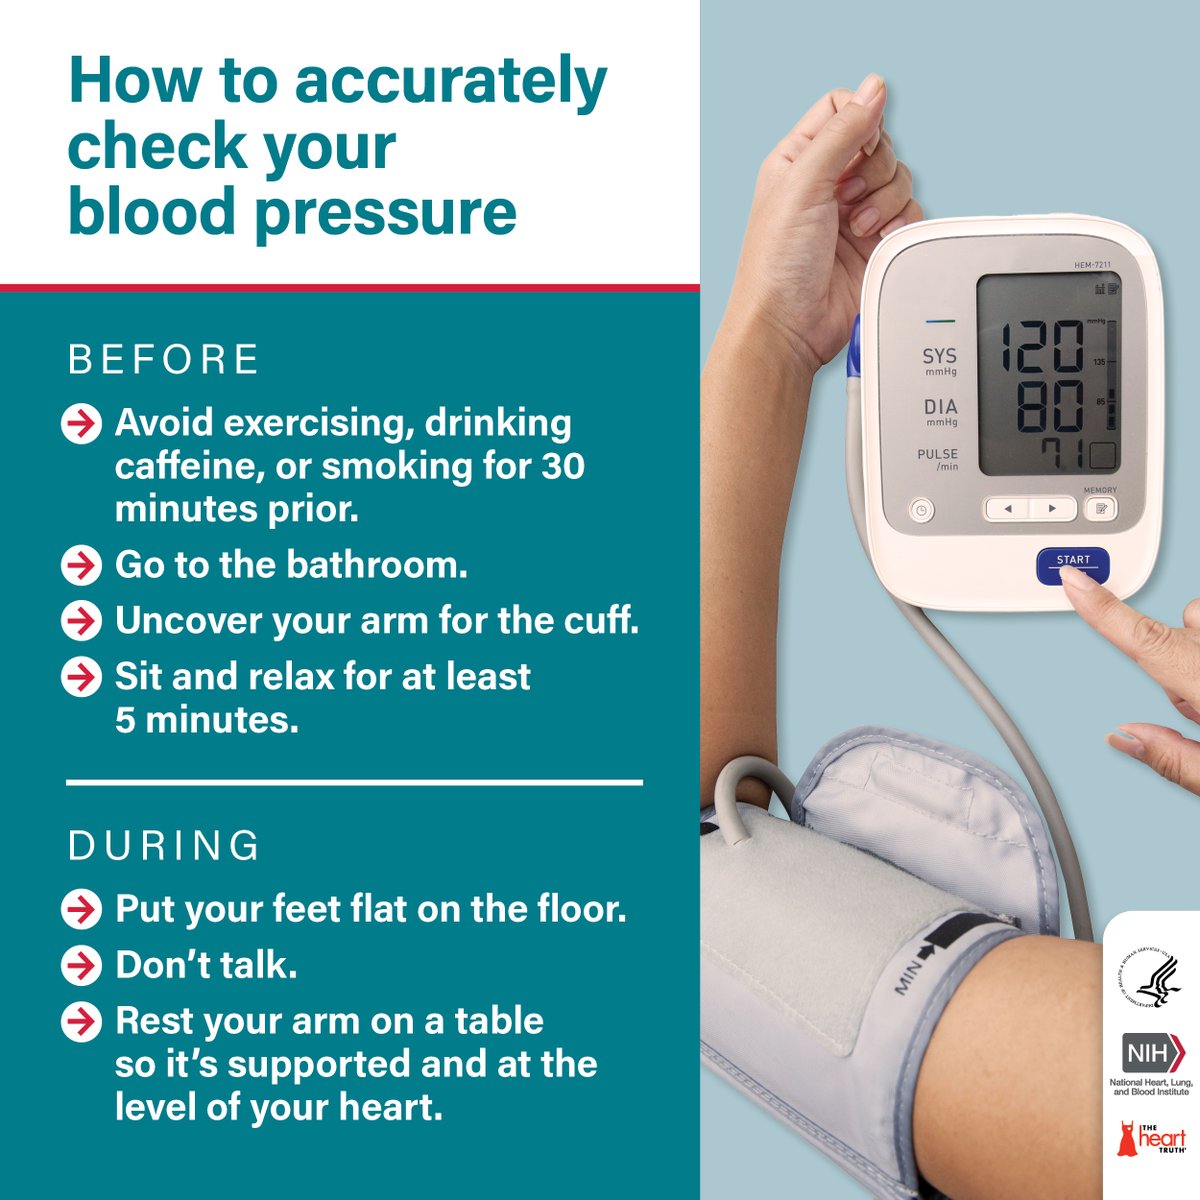 Are you measuring your blood pressure correctly? Avoid exercising, drinking caffeine, or smoking for 30 minutes before measuring. While measuring, make sure you sit quietly with feet flat on the floor. Learn more 👇 @thehearttruth #HealthyBrainLA